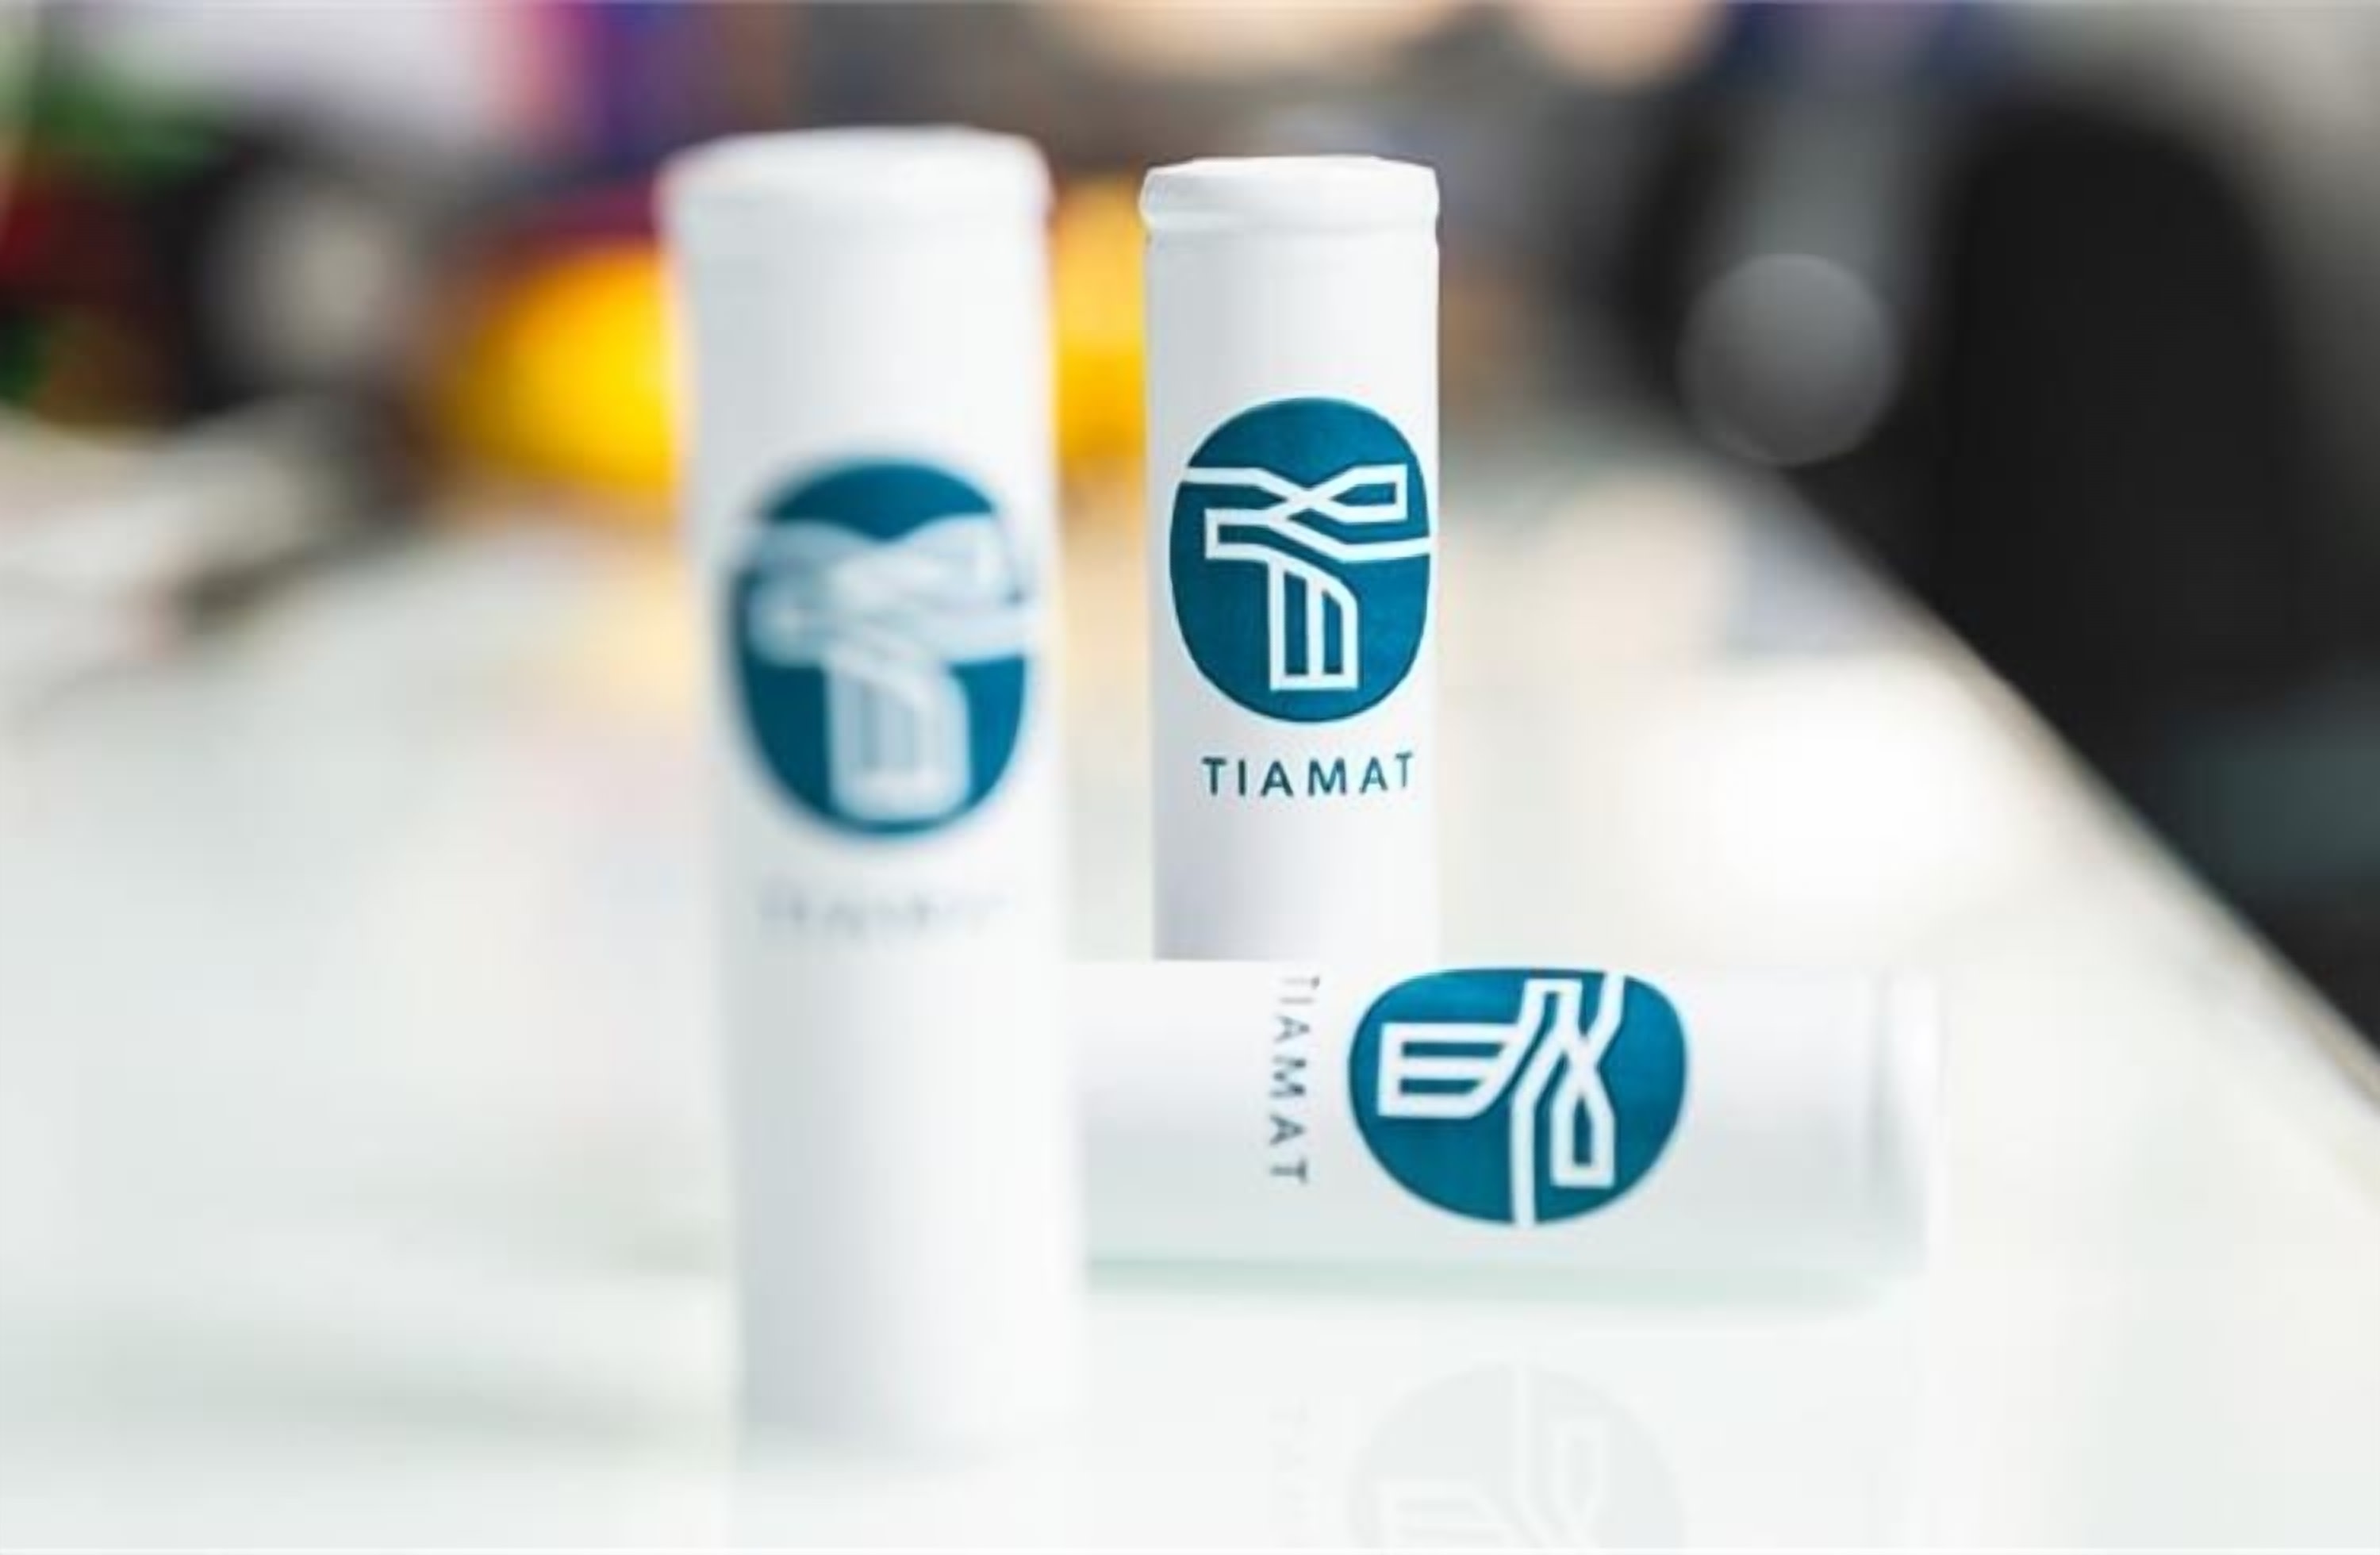 Stellantis Invests in Tiamat and Sodium-Ion Technology